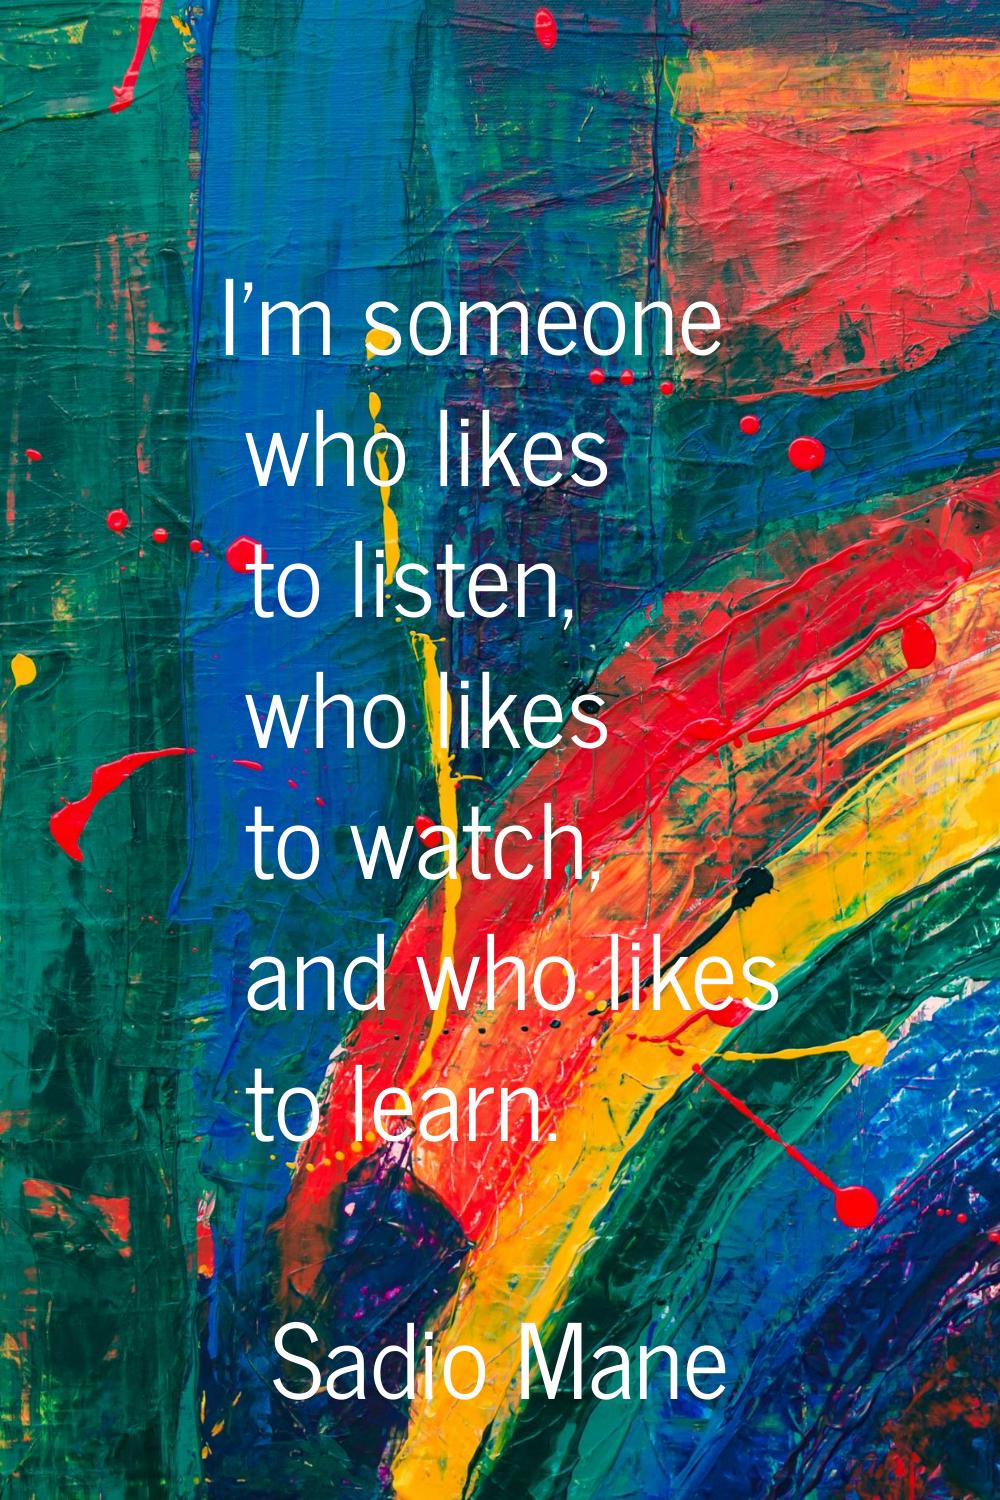 I'm someone who likes to listen, who likes to watch, and who likes to learn.